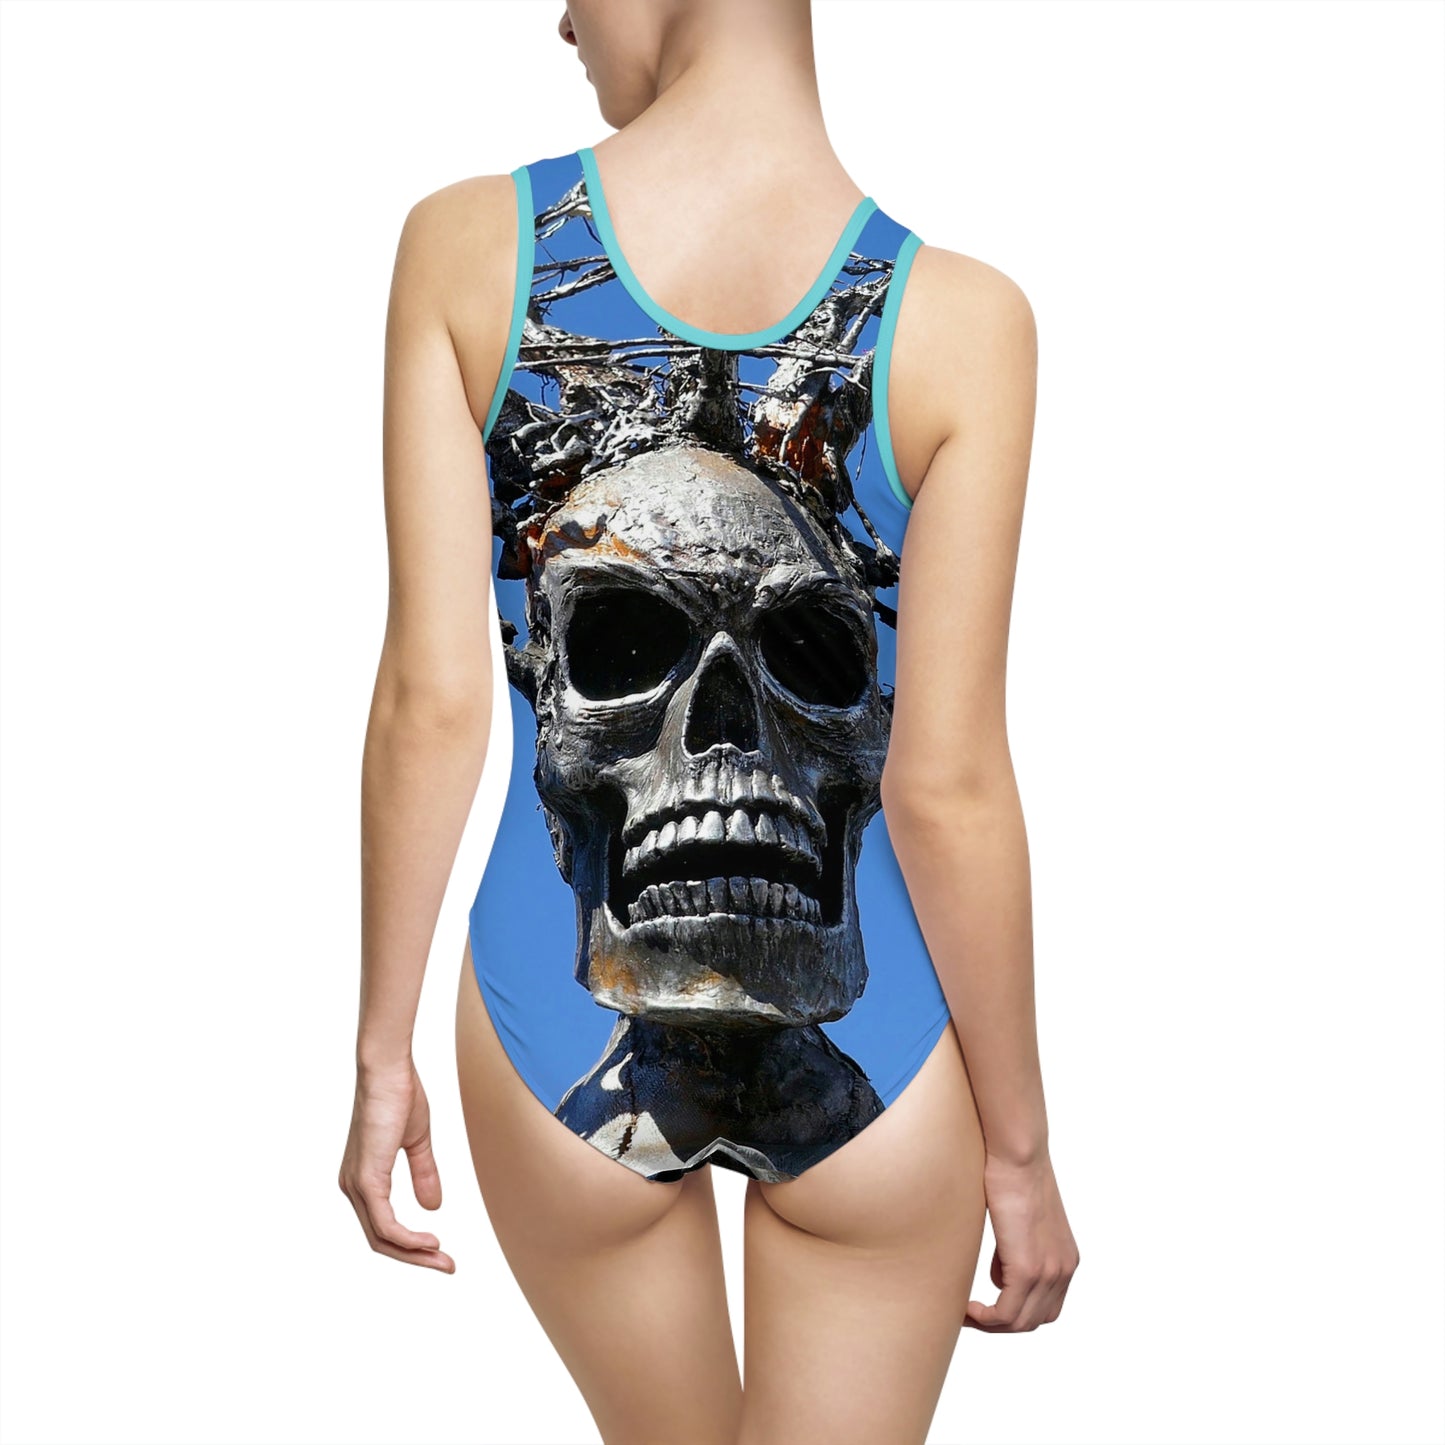 Skull Warrior Stare - Women's Classic One-Piece Swimsuit - Fry1Productions